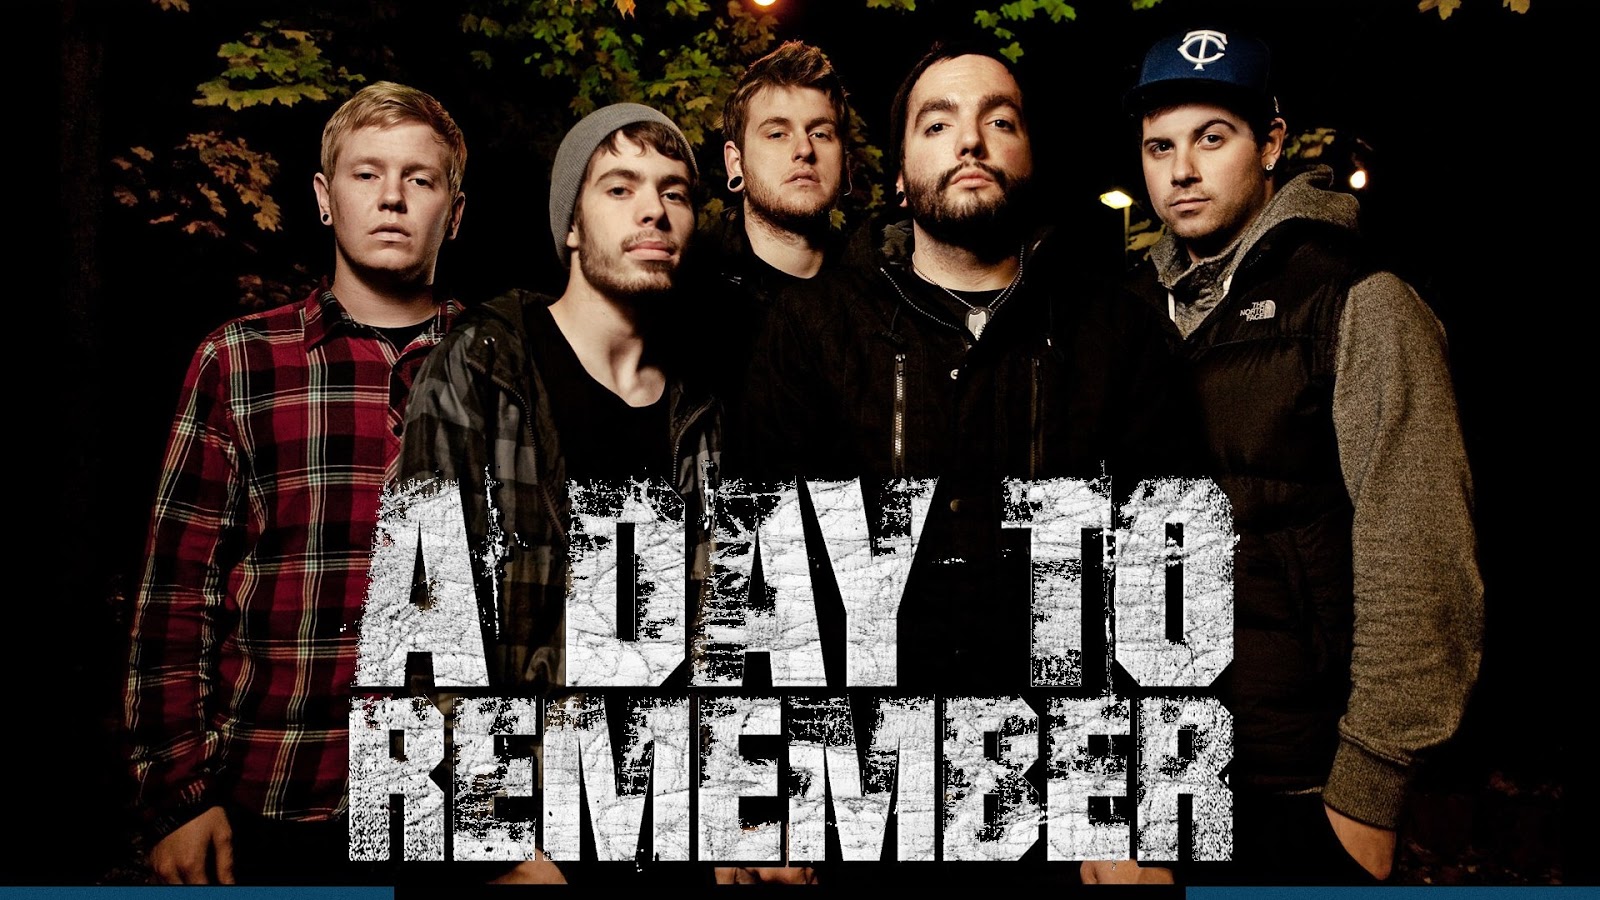 to My Blog... BIOGRAFI "A DAY TO REMEMBER"